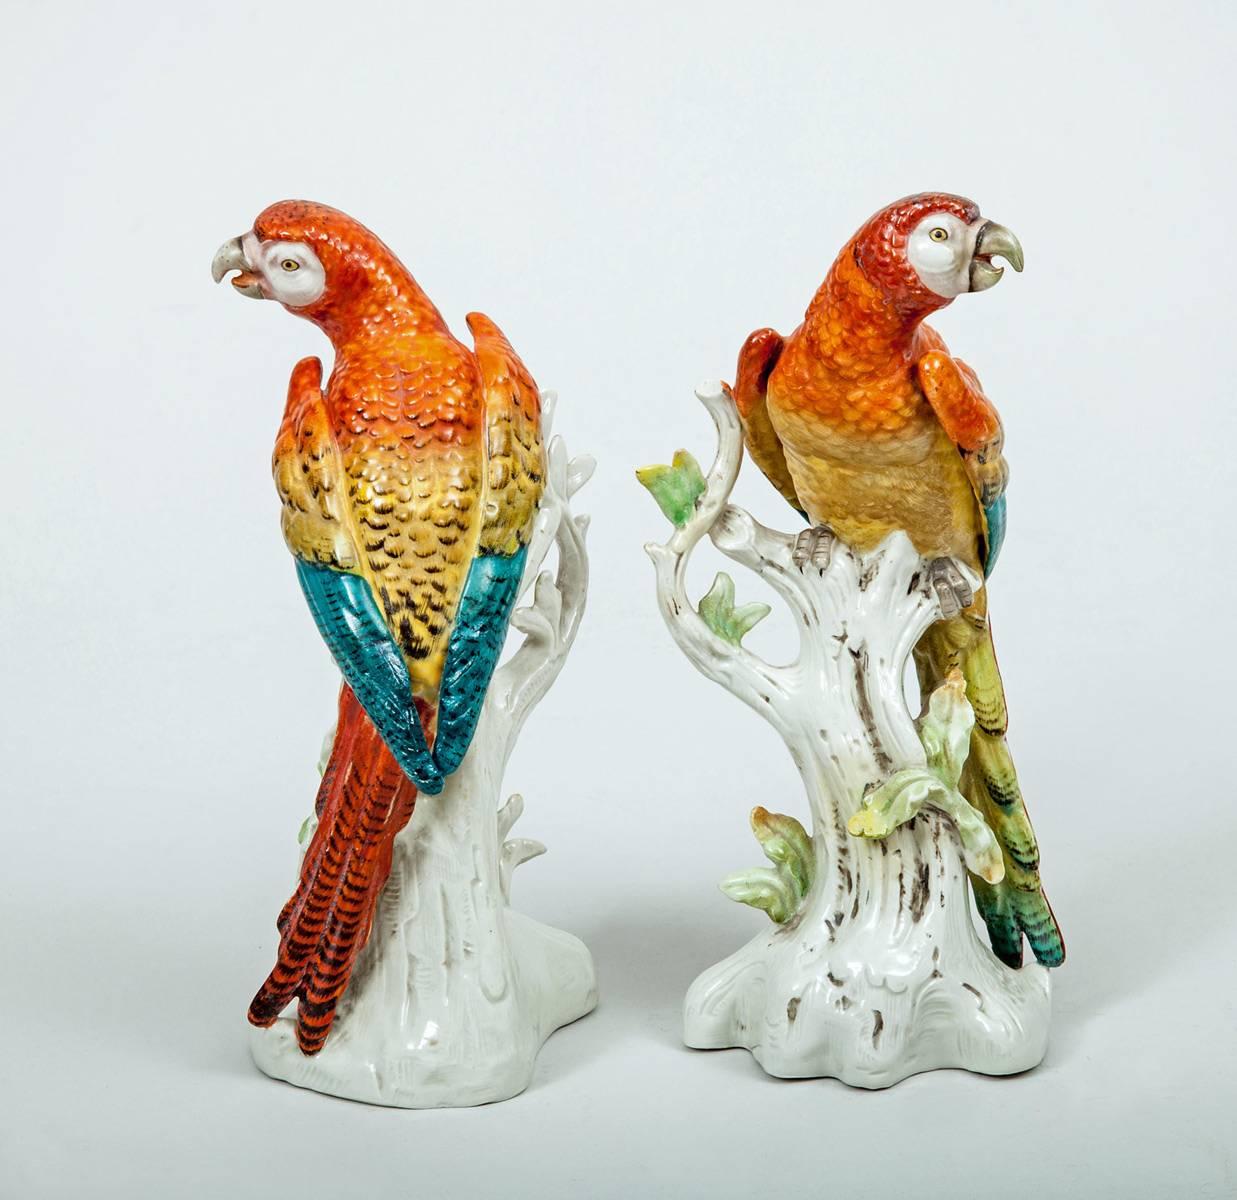 Pair of porcelain parrots perched on a tree stump decorated in brightly colored enamels of orange, yellow, teal and red with black markings. No manufacturers mark on the bottom, but most likely German.